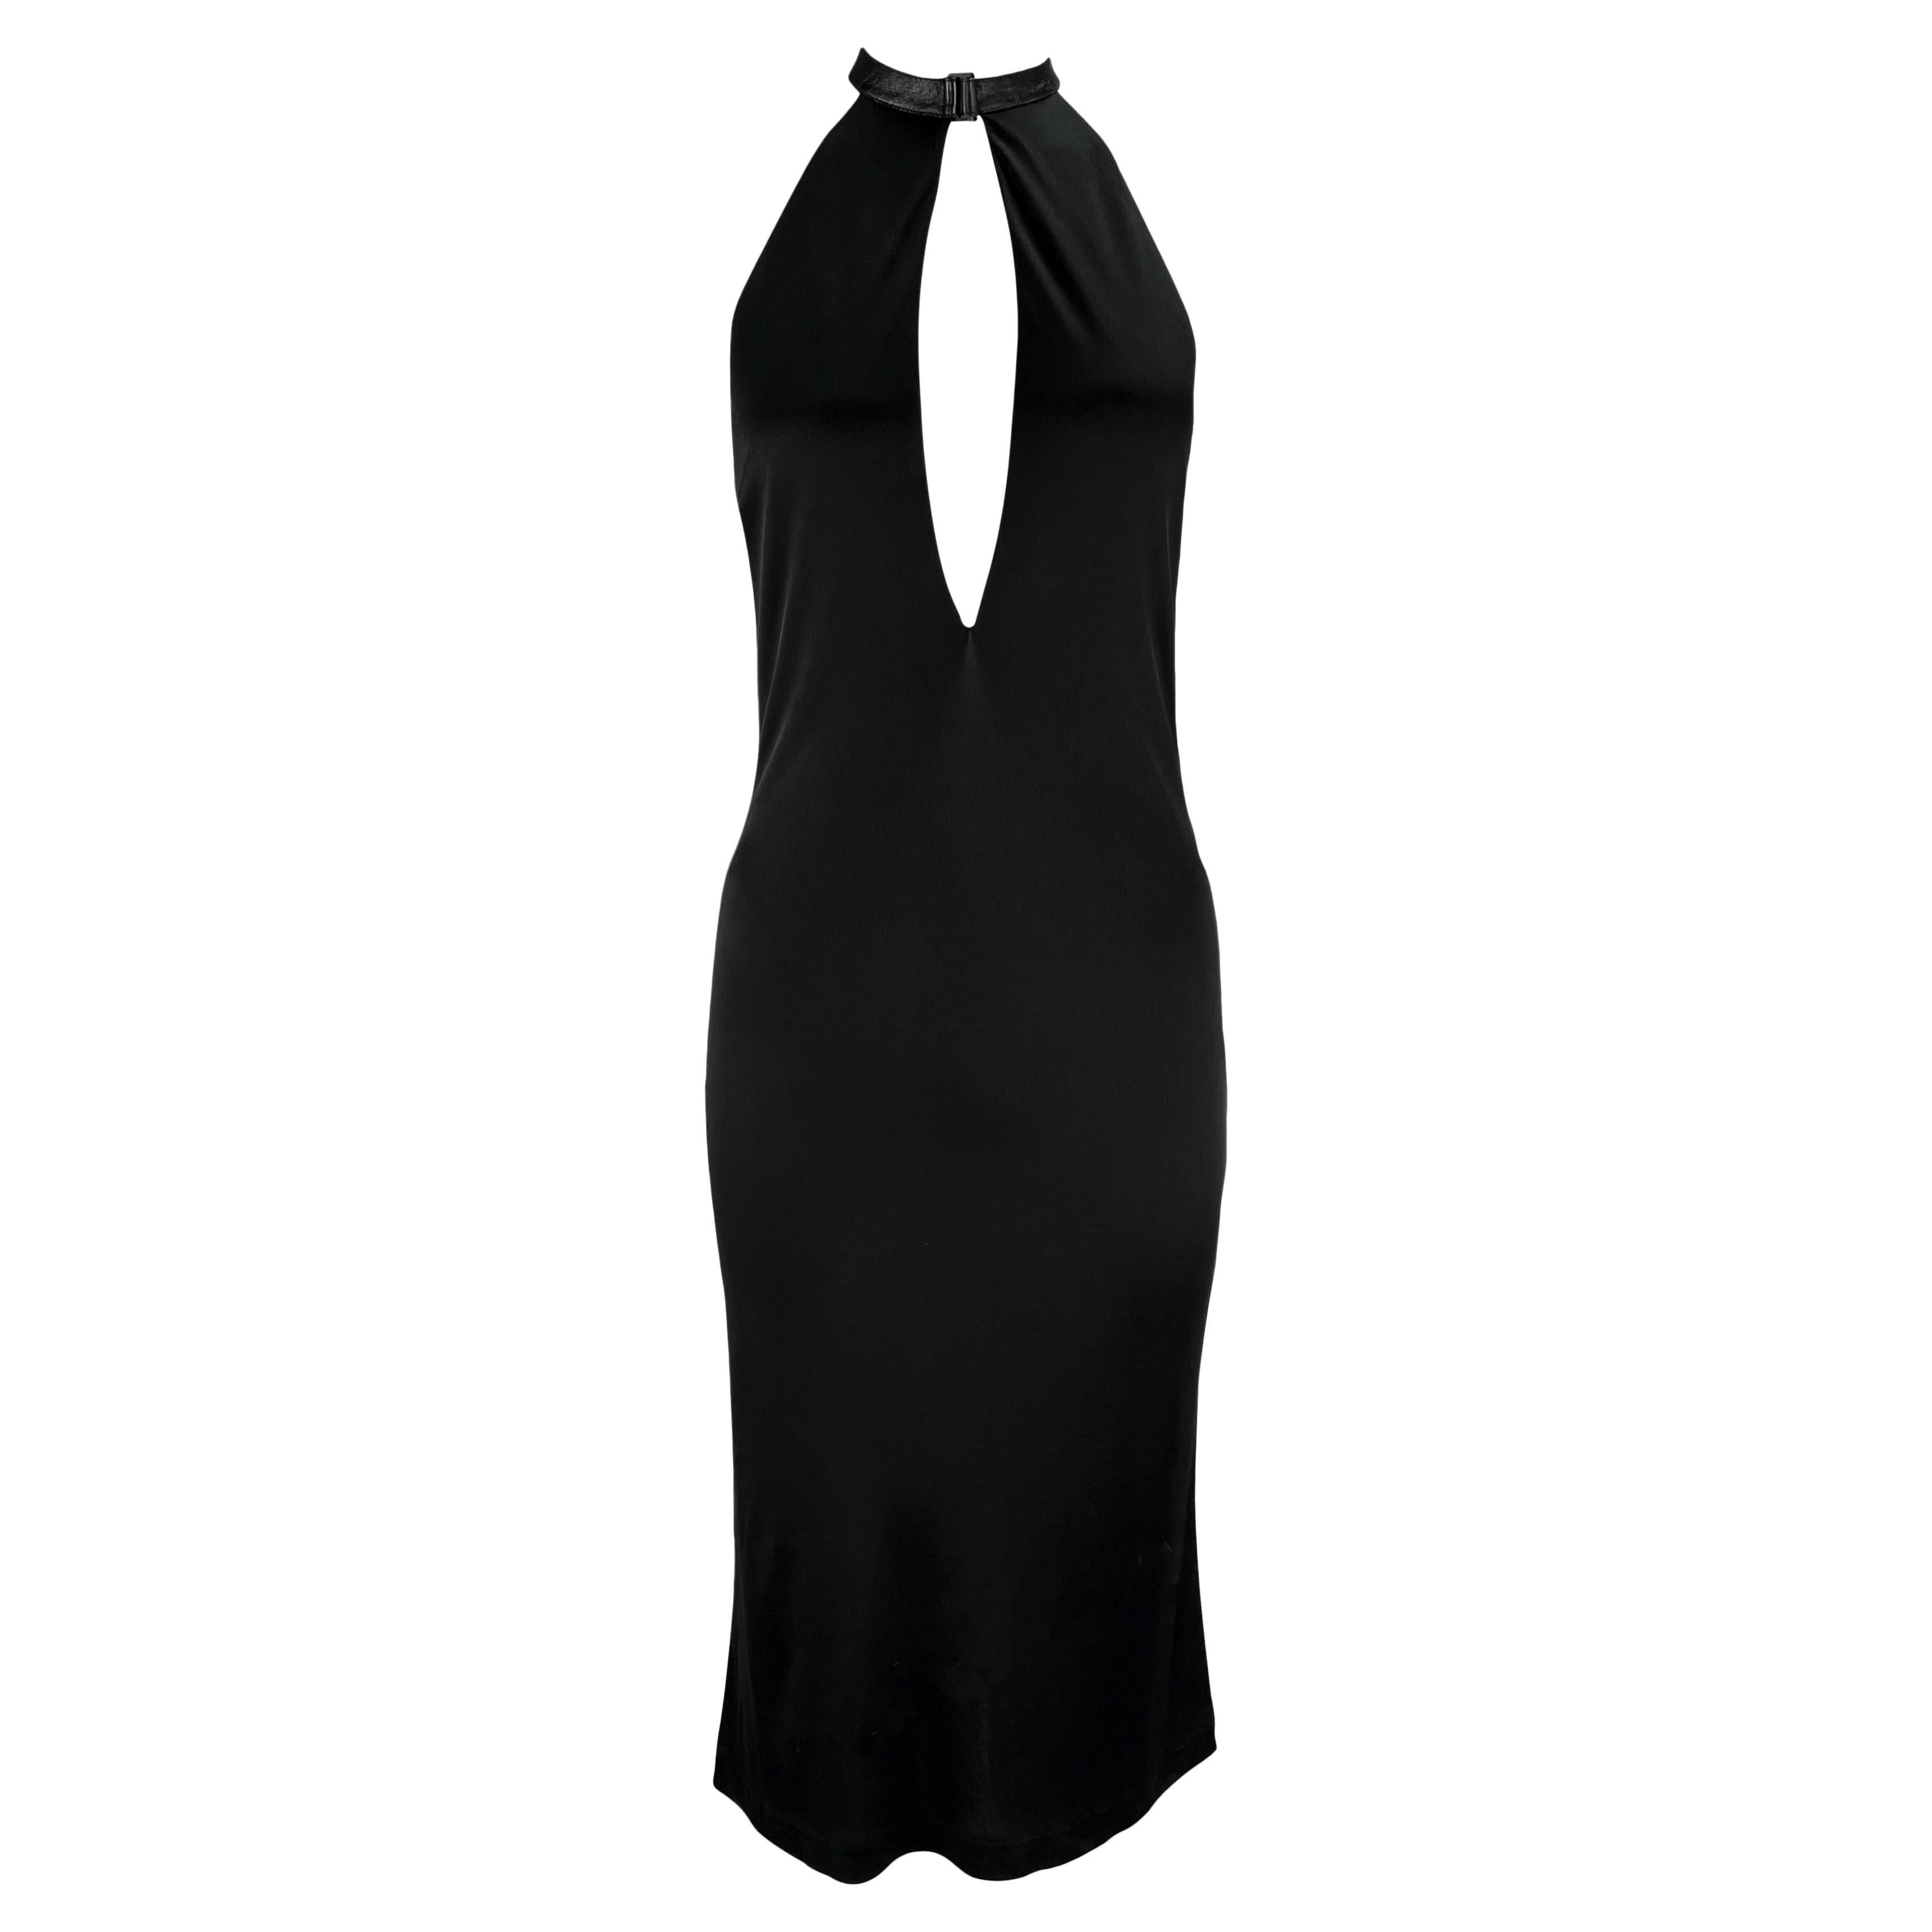 S/S 2001 Gucci by Tom Ford Black Leather Halter Strap Plunging Backless Dress For Sale